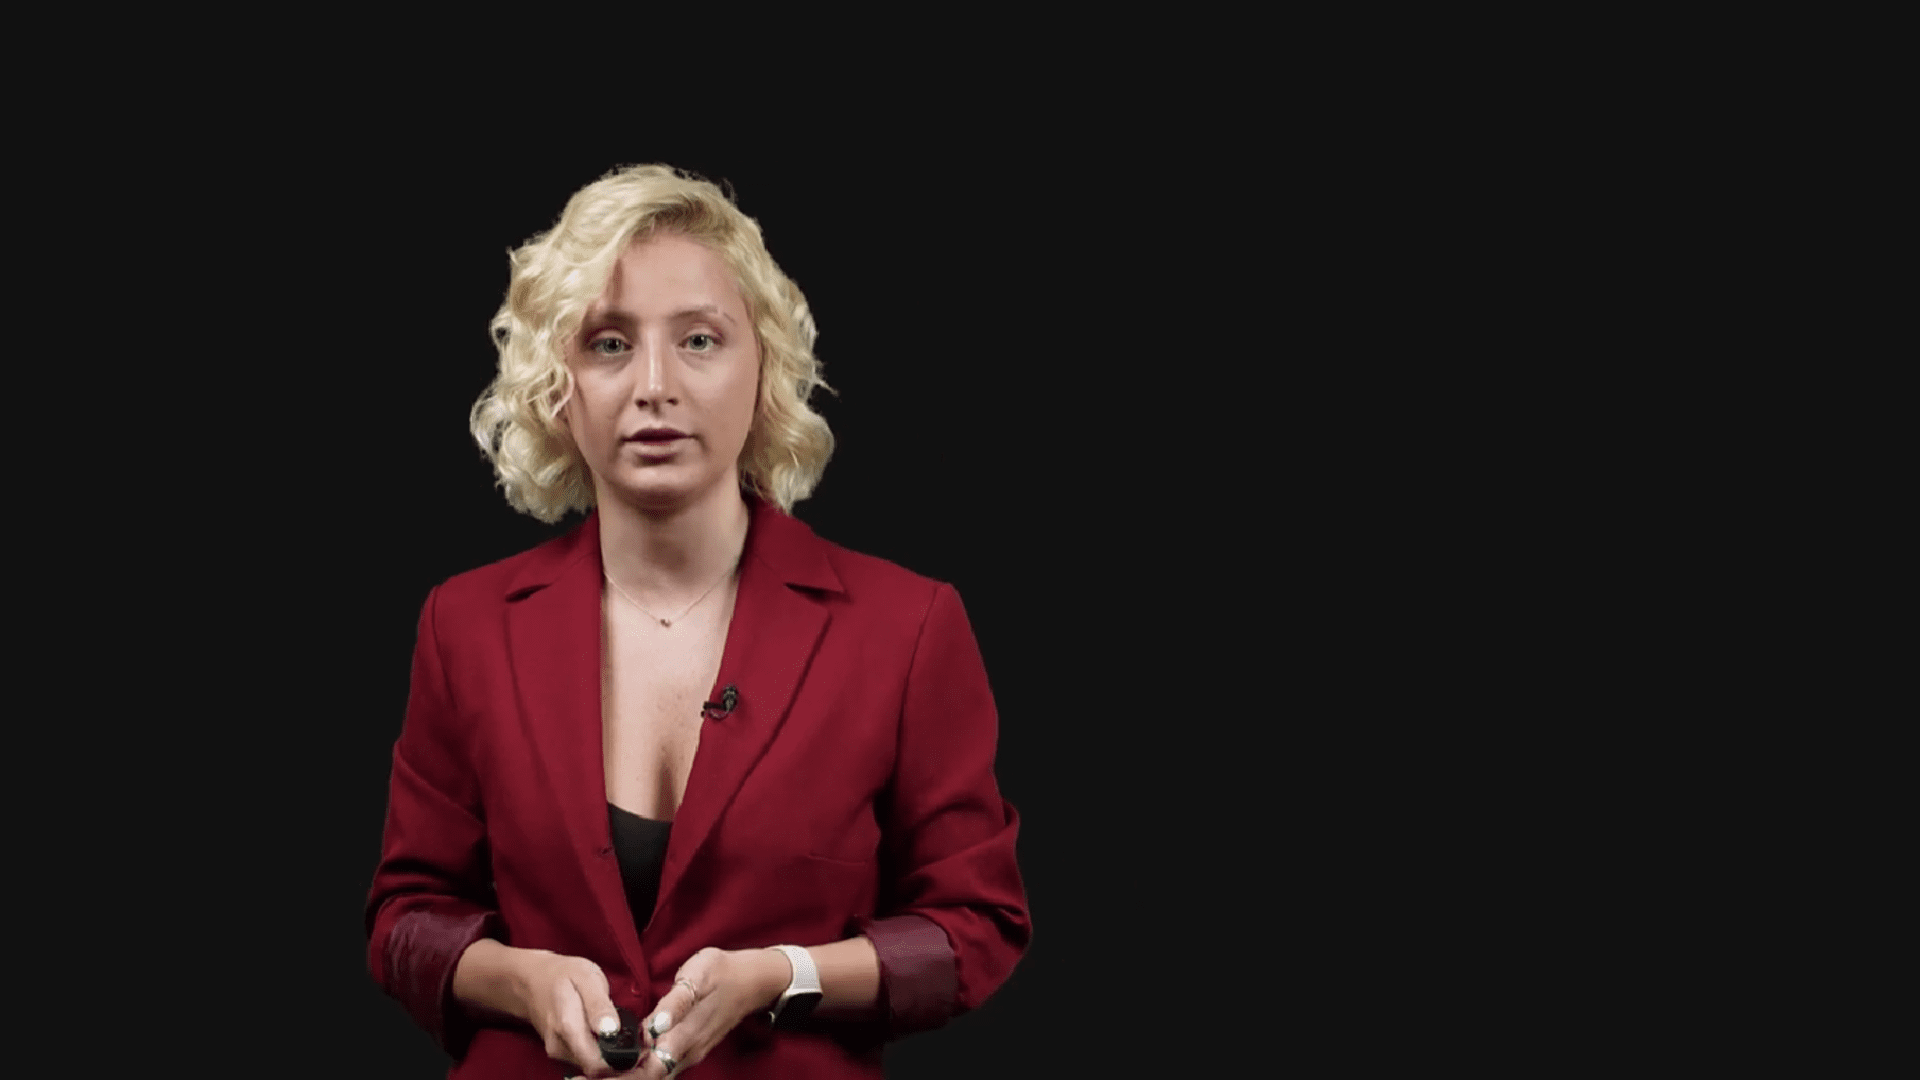 Nini Alania hosts an educational show in which she explains themes like taxation, the history of Georgian constitutionalism, and deoligarchization